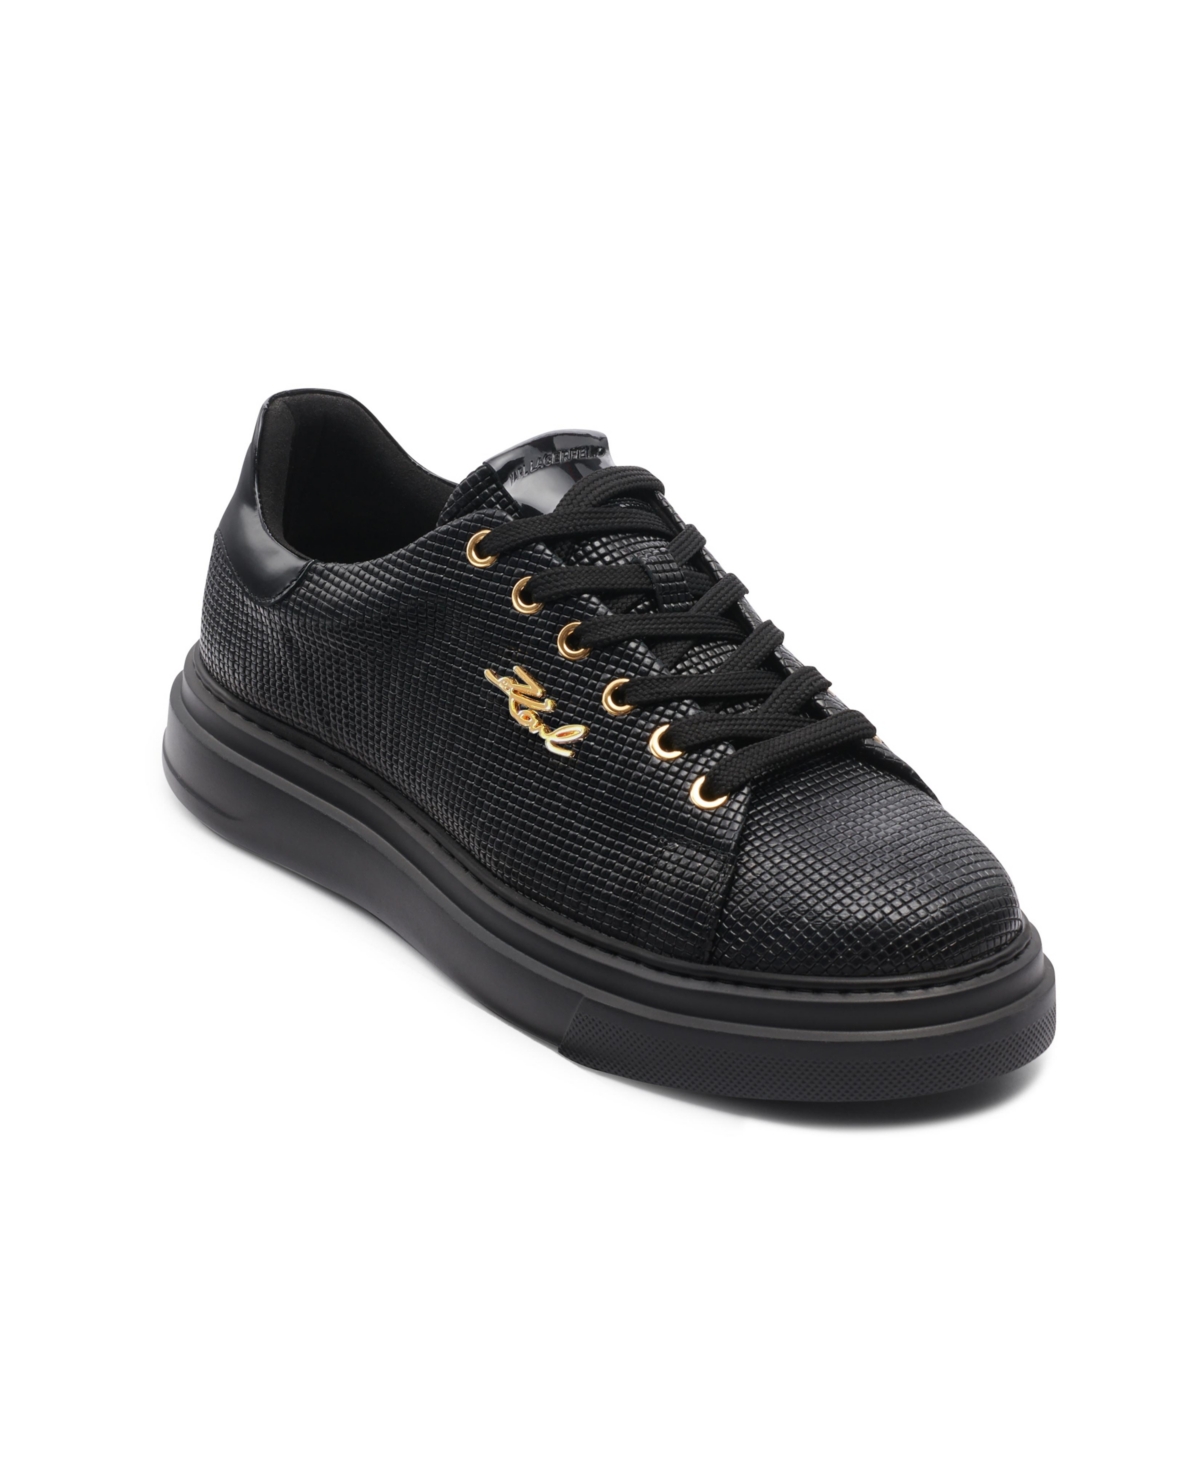 Karl Lagerfeld Men's White Label Textured Leather Karl Pin Sneakers In Black